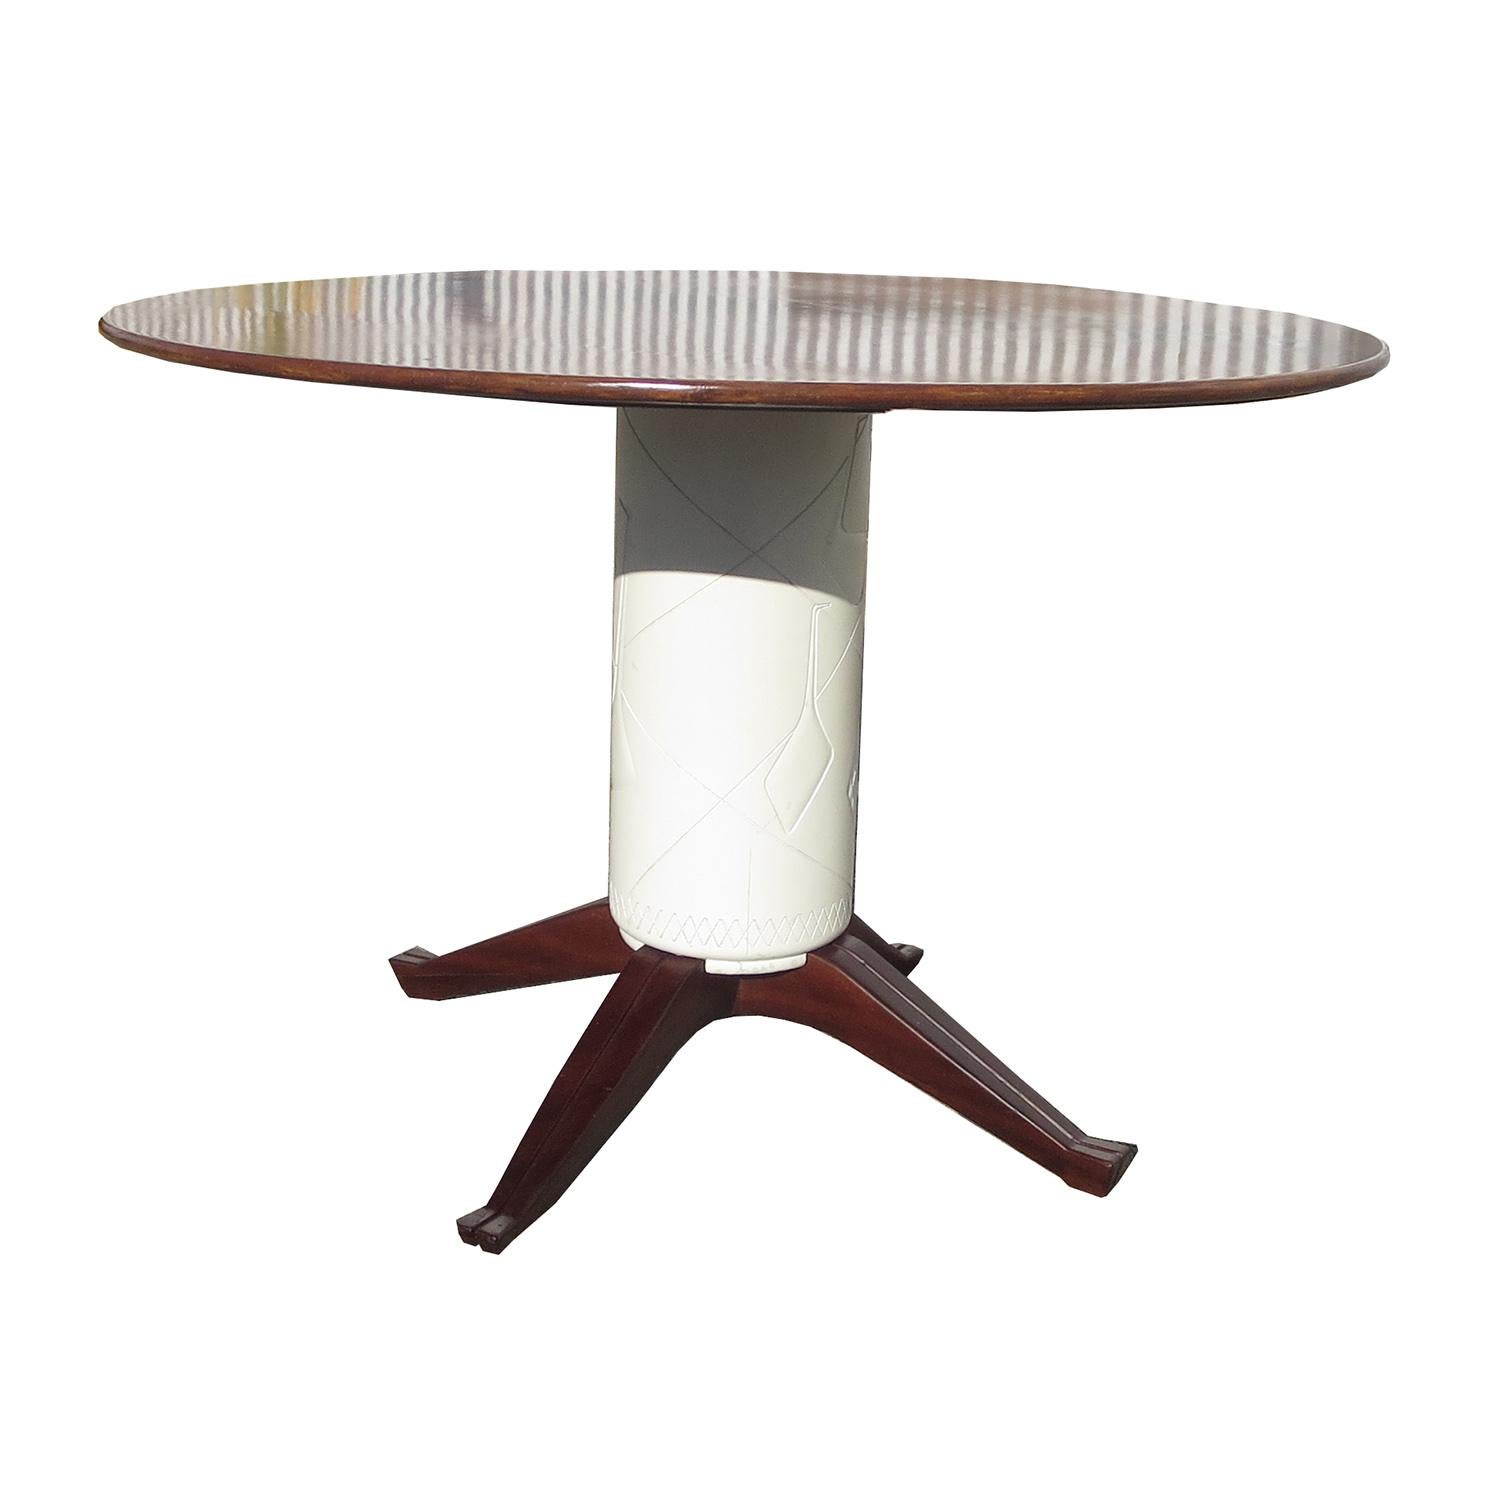 This charming and stylish table is the perfect scale for a smaller dining room, or breakfast area. The top is finished cherrywood, and the four legs are a dark walnut. The center post is a carved and painted wood. The finishes are original, and it